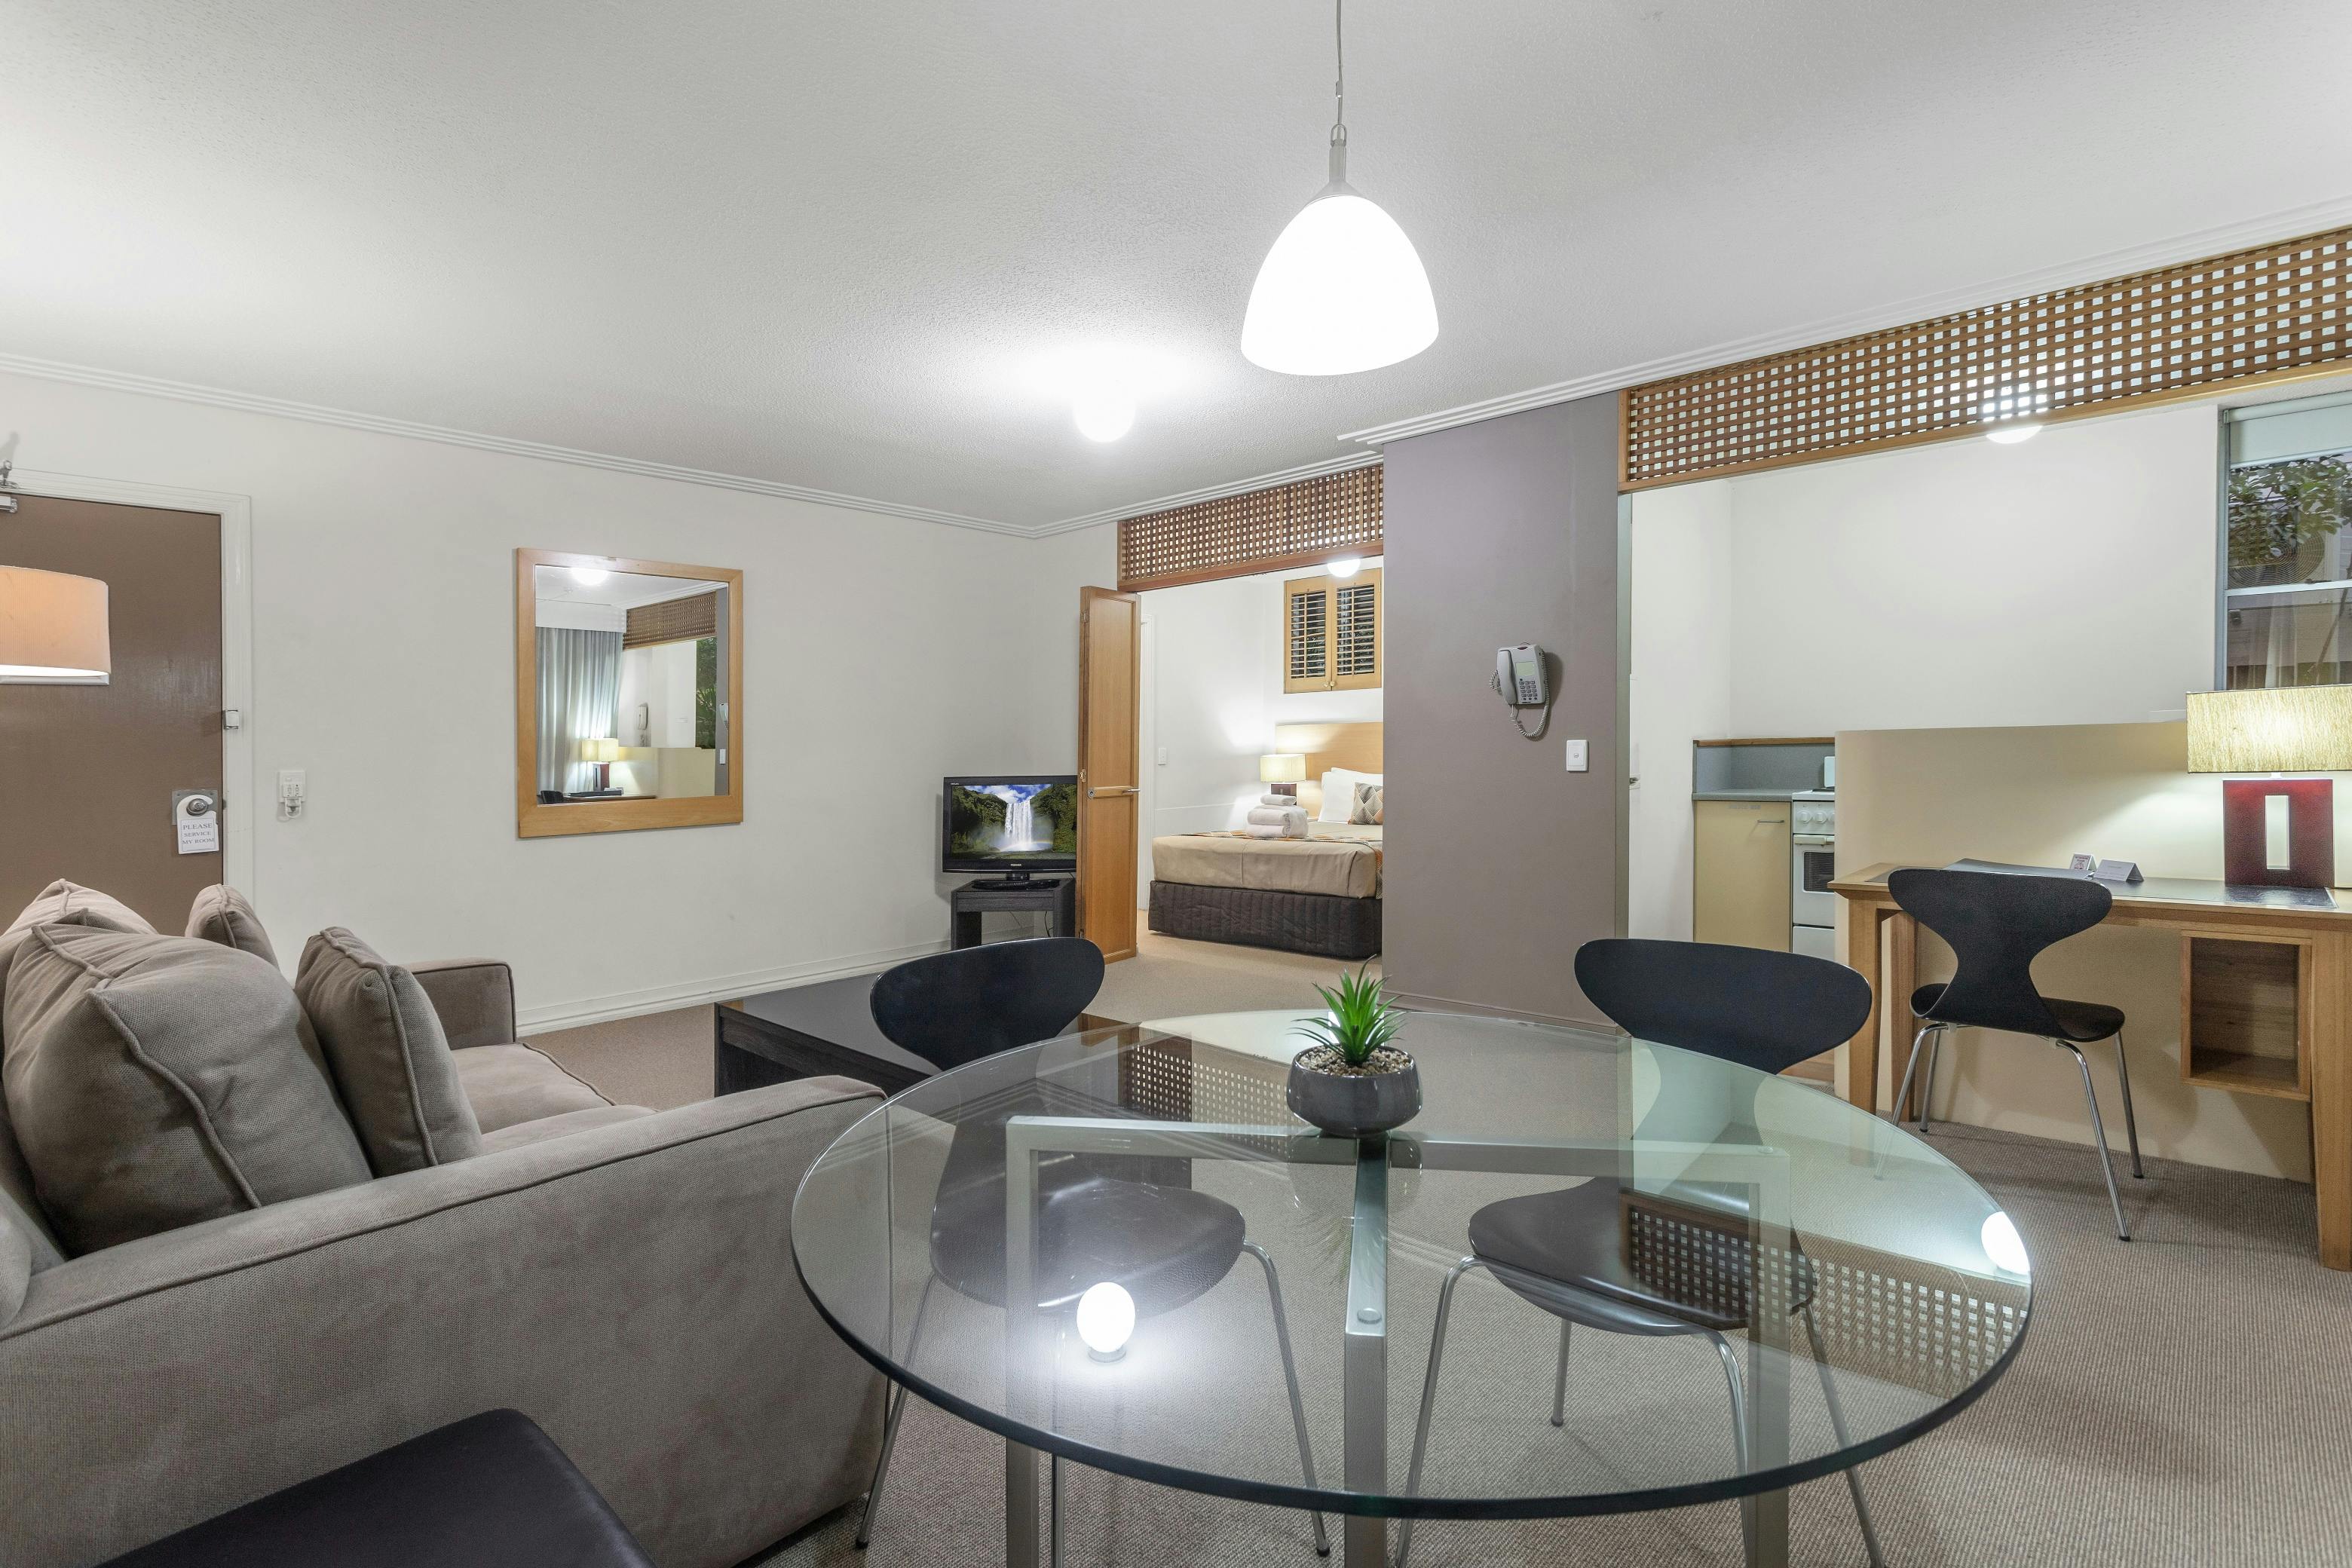 One bedroom apartment near Brisbane Airport and city, weekly rates available